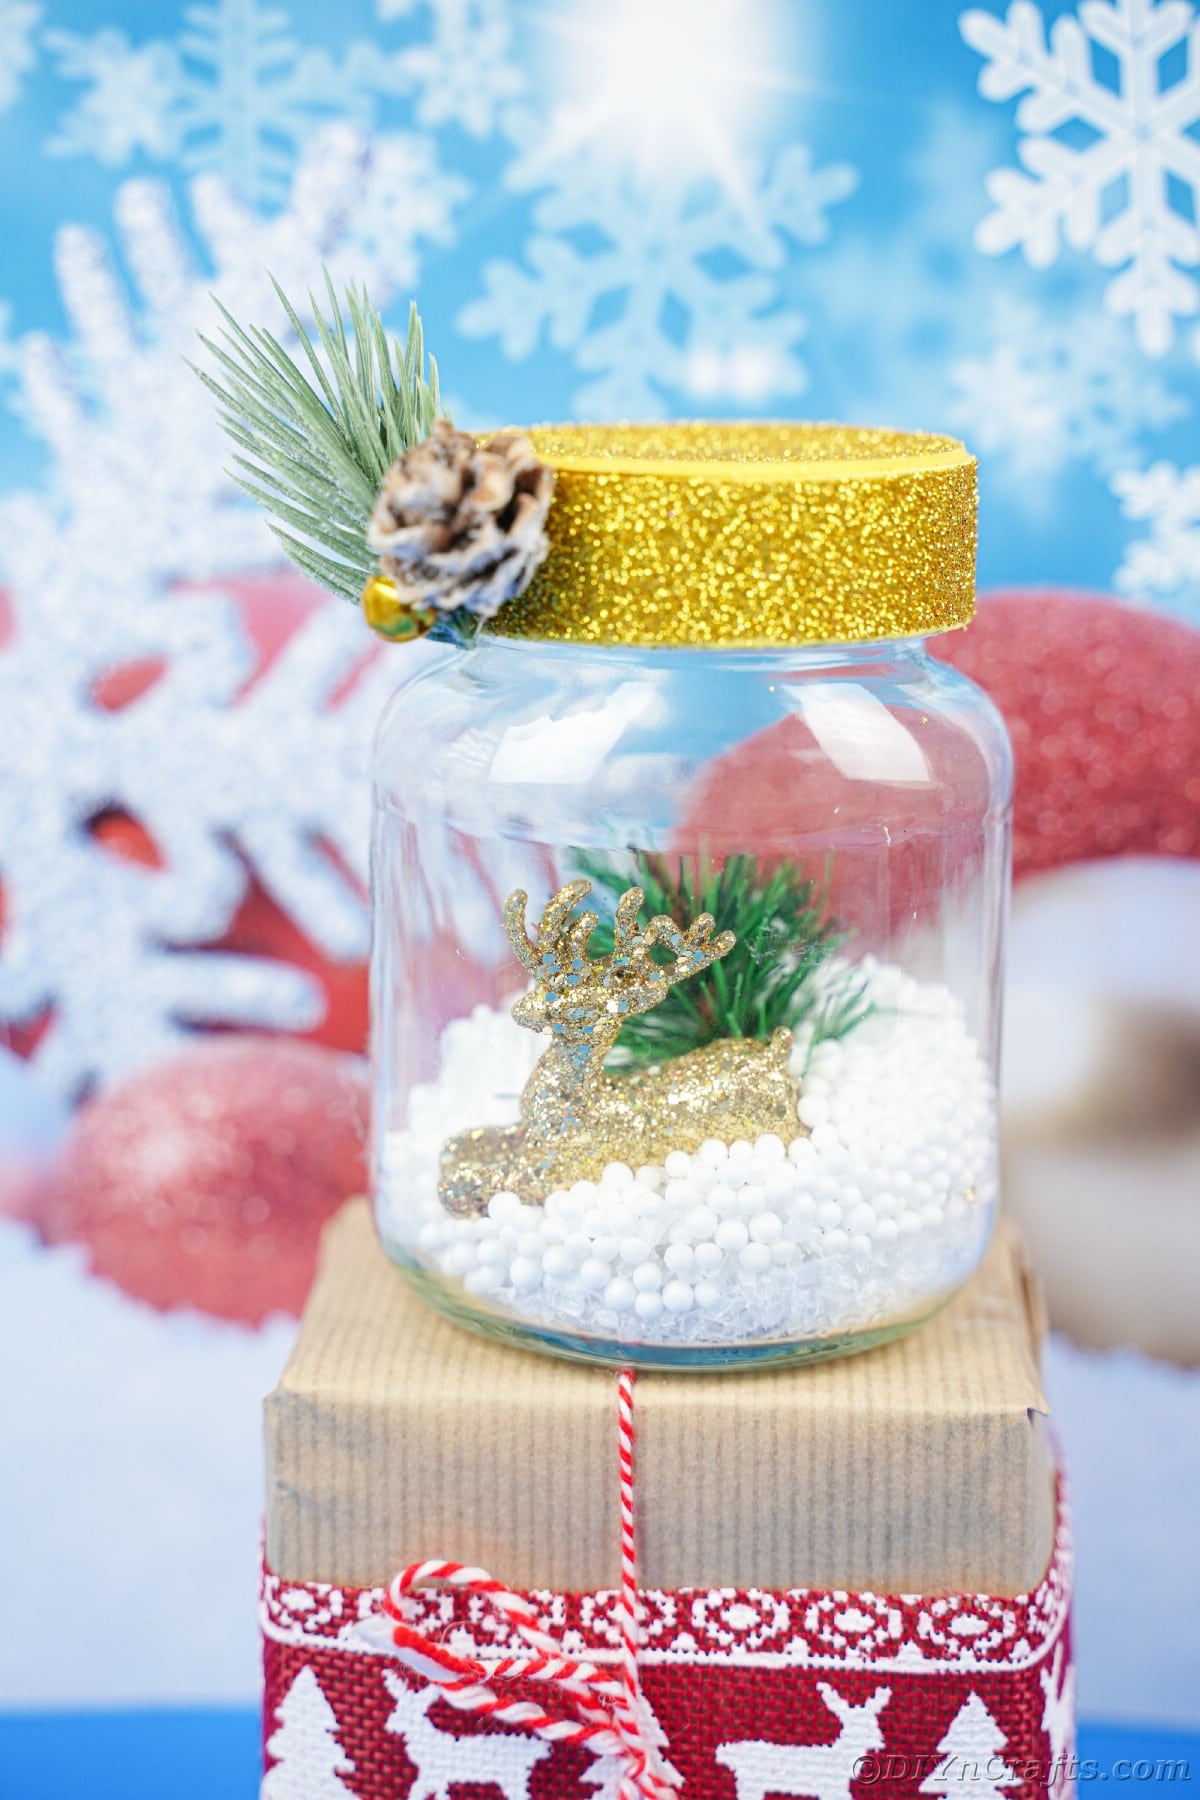 snow globe with yellow cap on top of gift with blue background